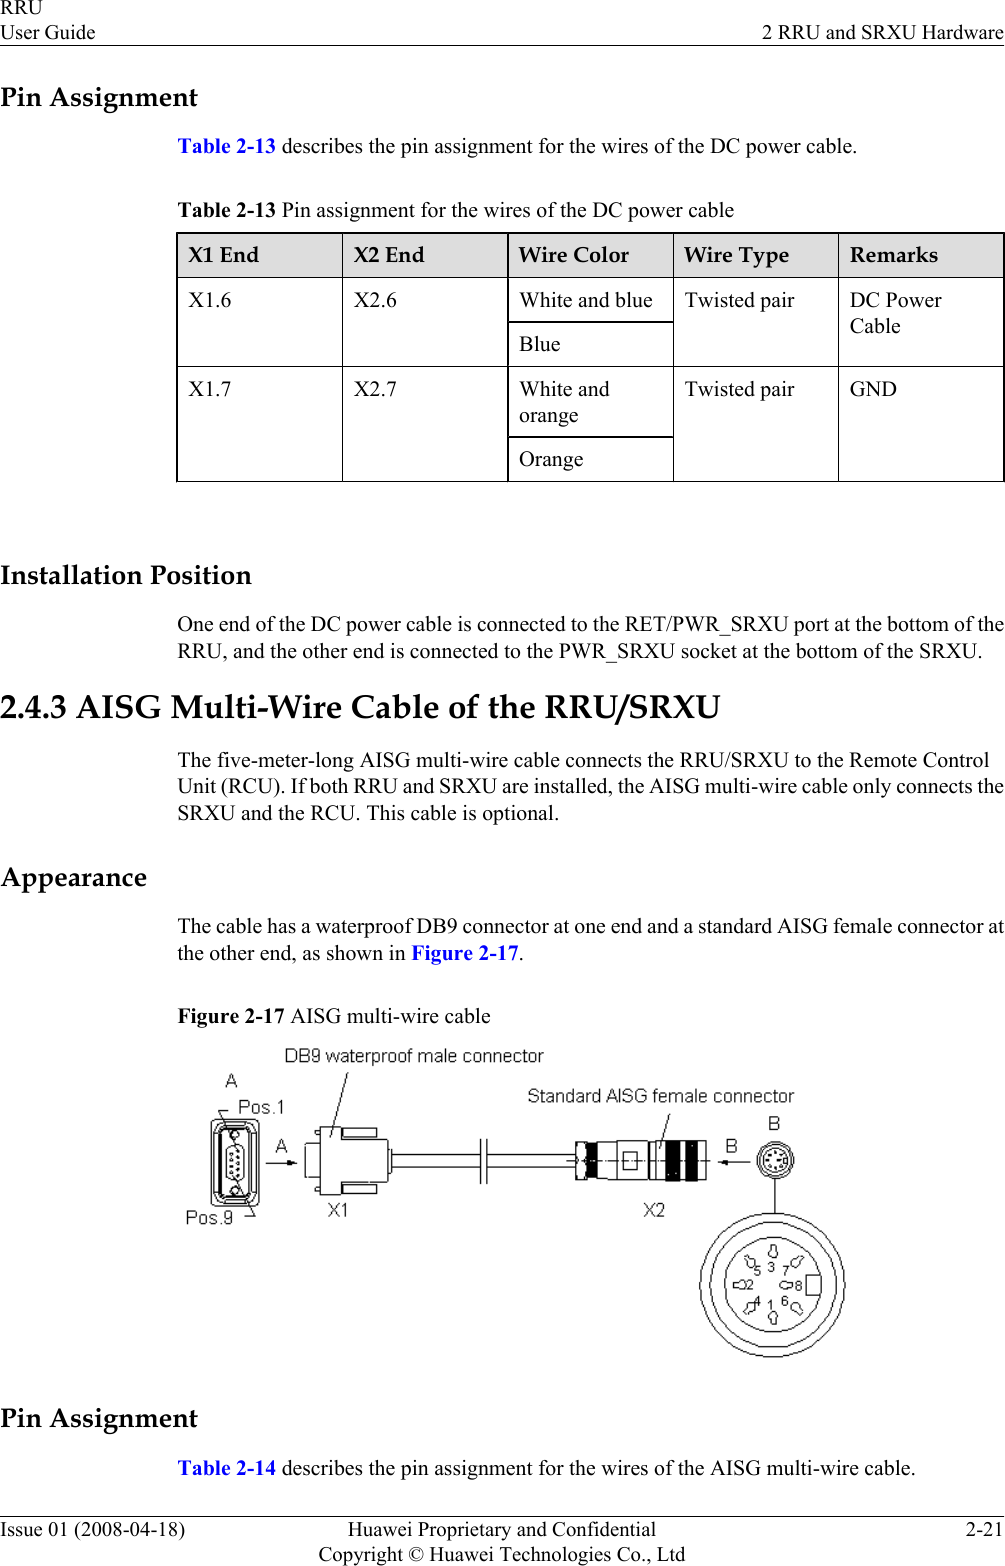 Pin AssignmentTable 2-13 describes the pin assignment for the wires of the DC power cable.Table 2-13 Pin assignment for the wires of the DC power cableX1 End X2 End Wire Color Wire Type RemarksX1.6 X2.6 White and blue Twisted pair DC PowerCableBlueX1.7 X2.7 White andorangeTwisted pair GNDOrange Installation PositionOne end of the DC power cable is connected to the RET/PWR_SRXU port at the bottom of theRRU, and the other end is connected to the PWR_SRXU socket at the bottom of the SRXU.2.4.3 AISG Multi-Wire Cable of the RRU/SRXUThe five-meter-long AISG multi-wire cable connects the RRU/SRXU to the Remote ControlUnit (RCU). If both RRU and SRXU are installed, the AISG multi-wire cable only connects theSRXU and the RCU. This cable is optional.AppearanceThe cable has a waterproof DB9 connector at one end and a standard AISG female connector atthe other end, as shown in Figure 2-17.Figure 2-17 AISG multi-wire cablePin AssignmentTable 2-14 describes the pin assignment for the wires of the AISG multi-wire cable.RRUUser Guide 2 RRU and SRXU HardwareIssue 01 (2008-04-18) Huawei Proprietary and ConfidentialCopyright © Huawei Technologies Co., Ltd2-21